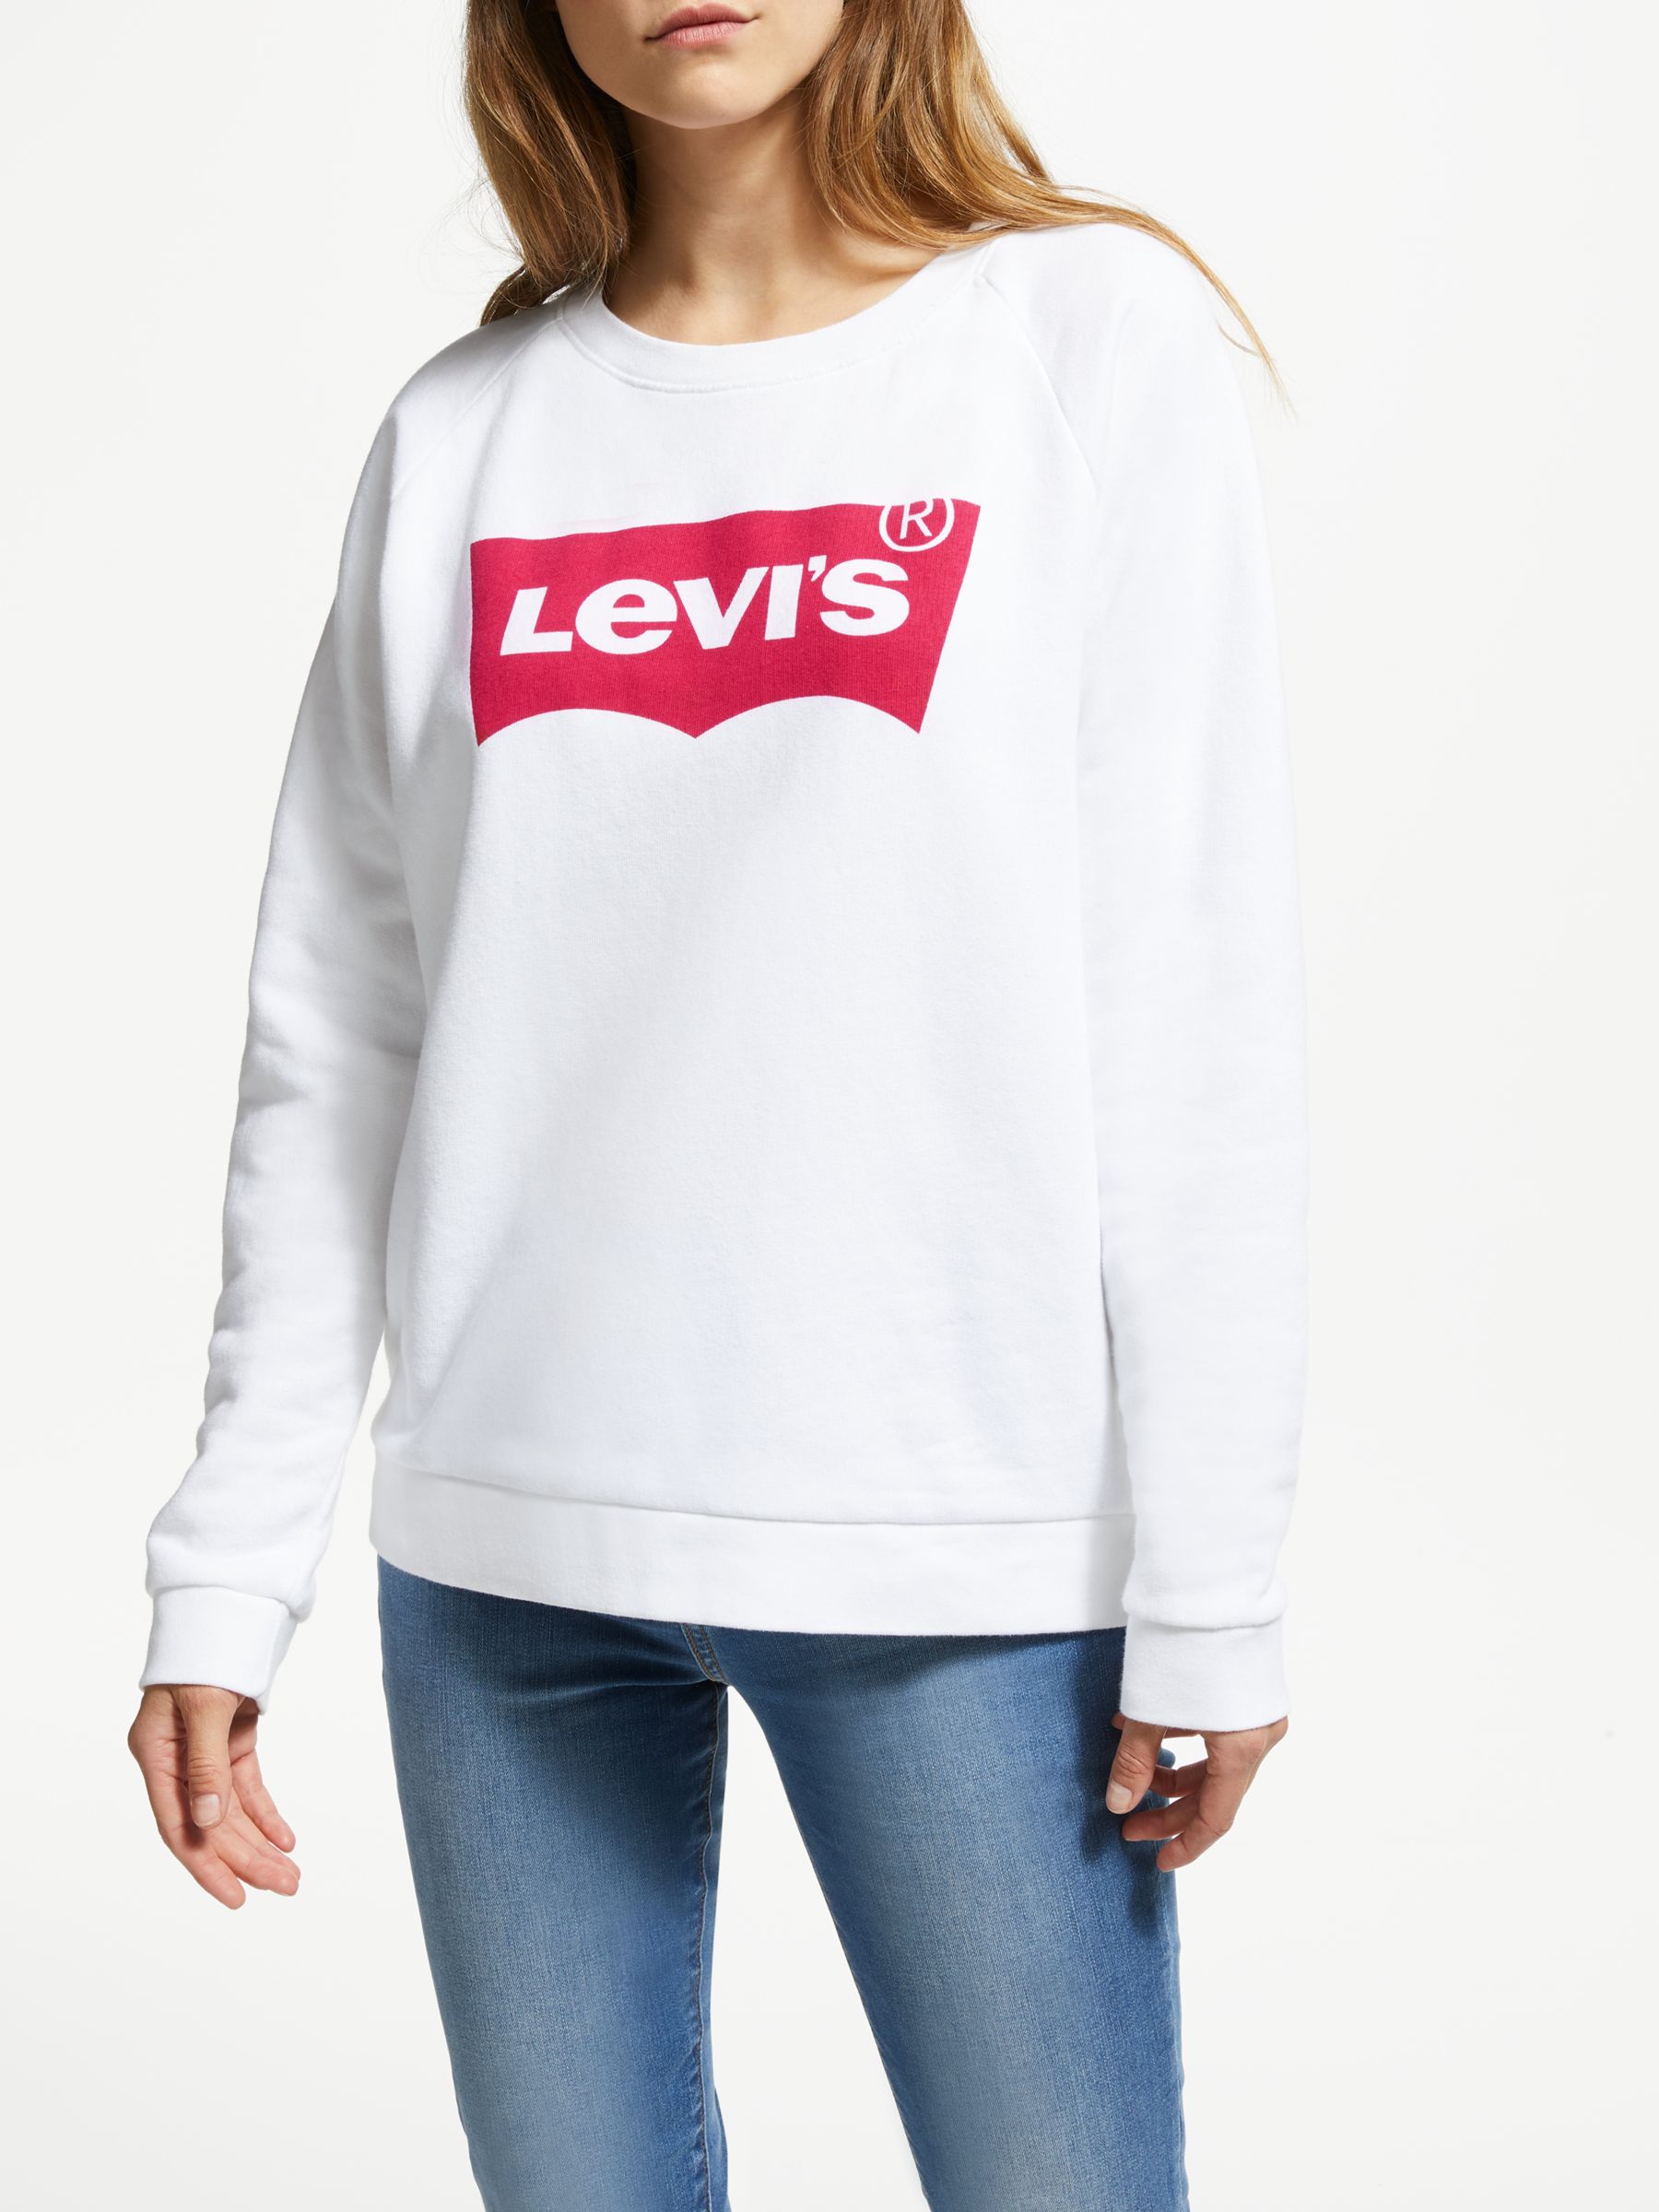 Levi's Relaxed Batwing Graphic Sweatshirt, White